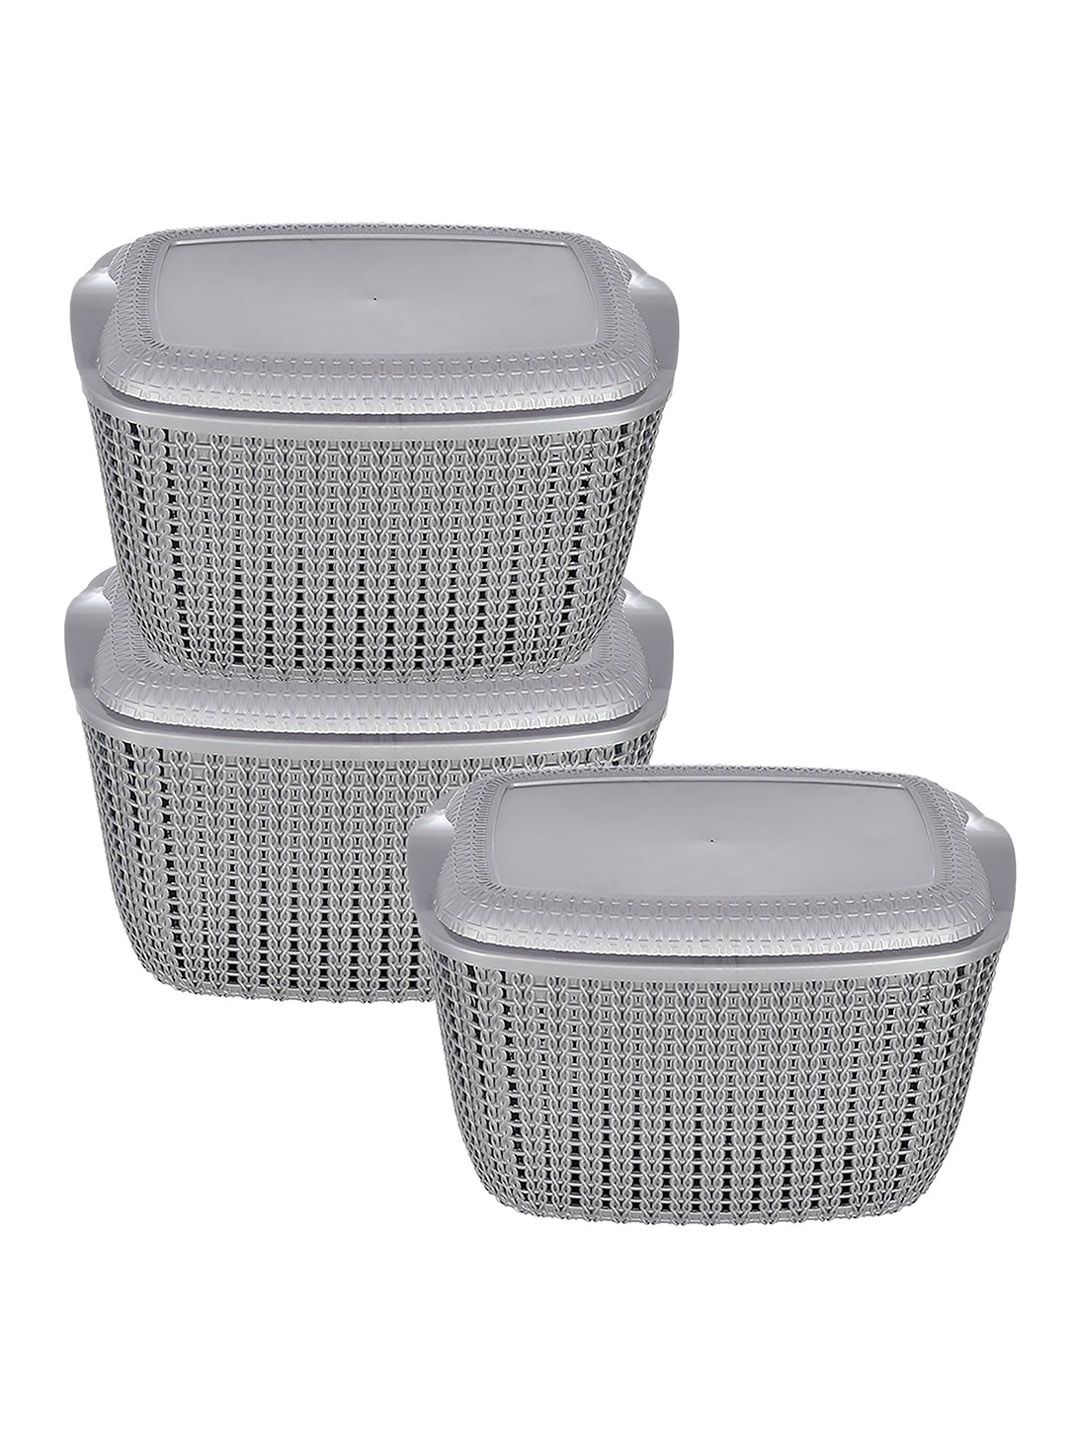 Kuber Industries Set Of 3 Grey Textured Plastic Baskets With Lids Price in India